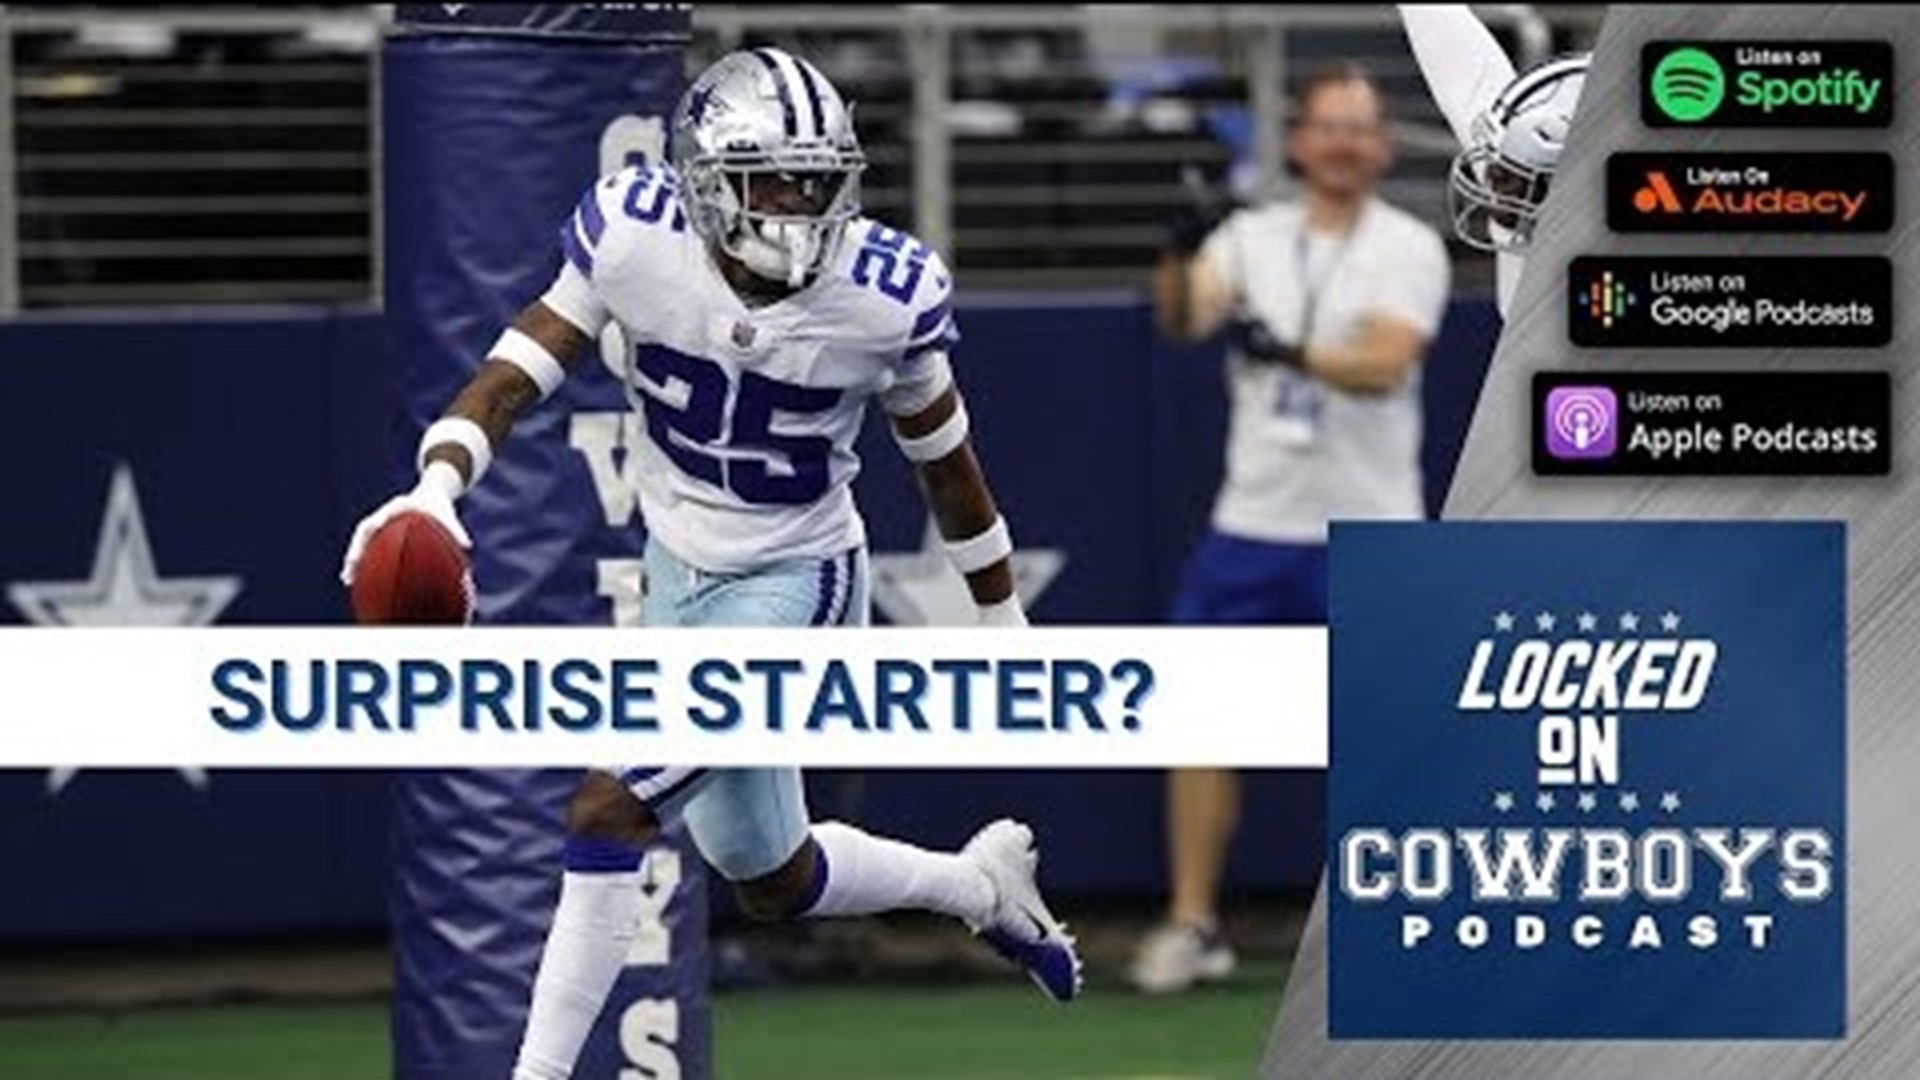 Marcus Mosher and Landon McCool discuss who could be a surprise starter for the Dallas Cowboys during the 2022 season.